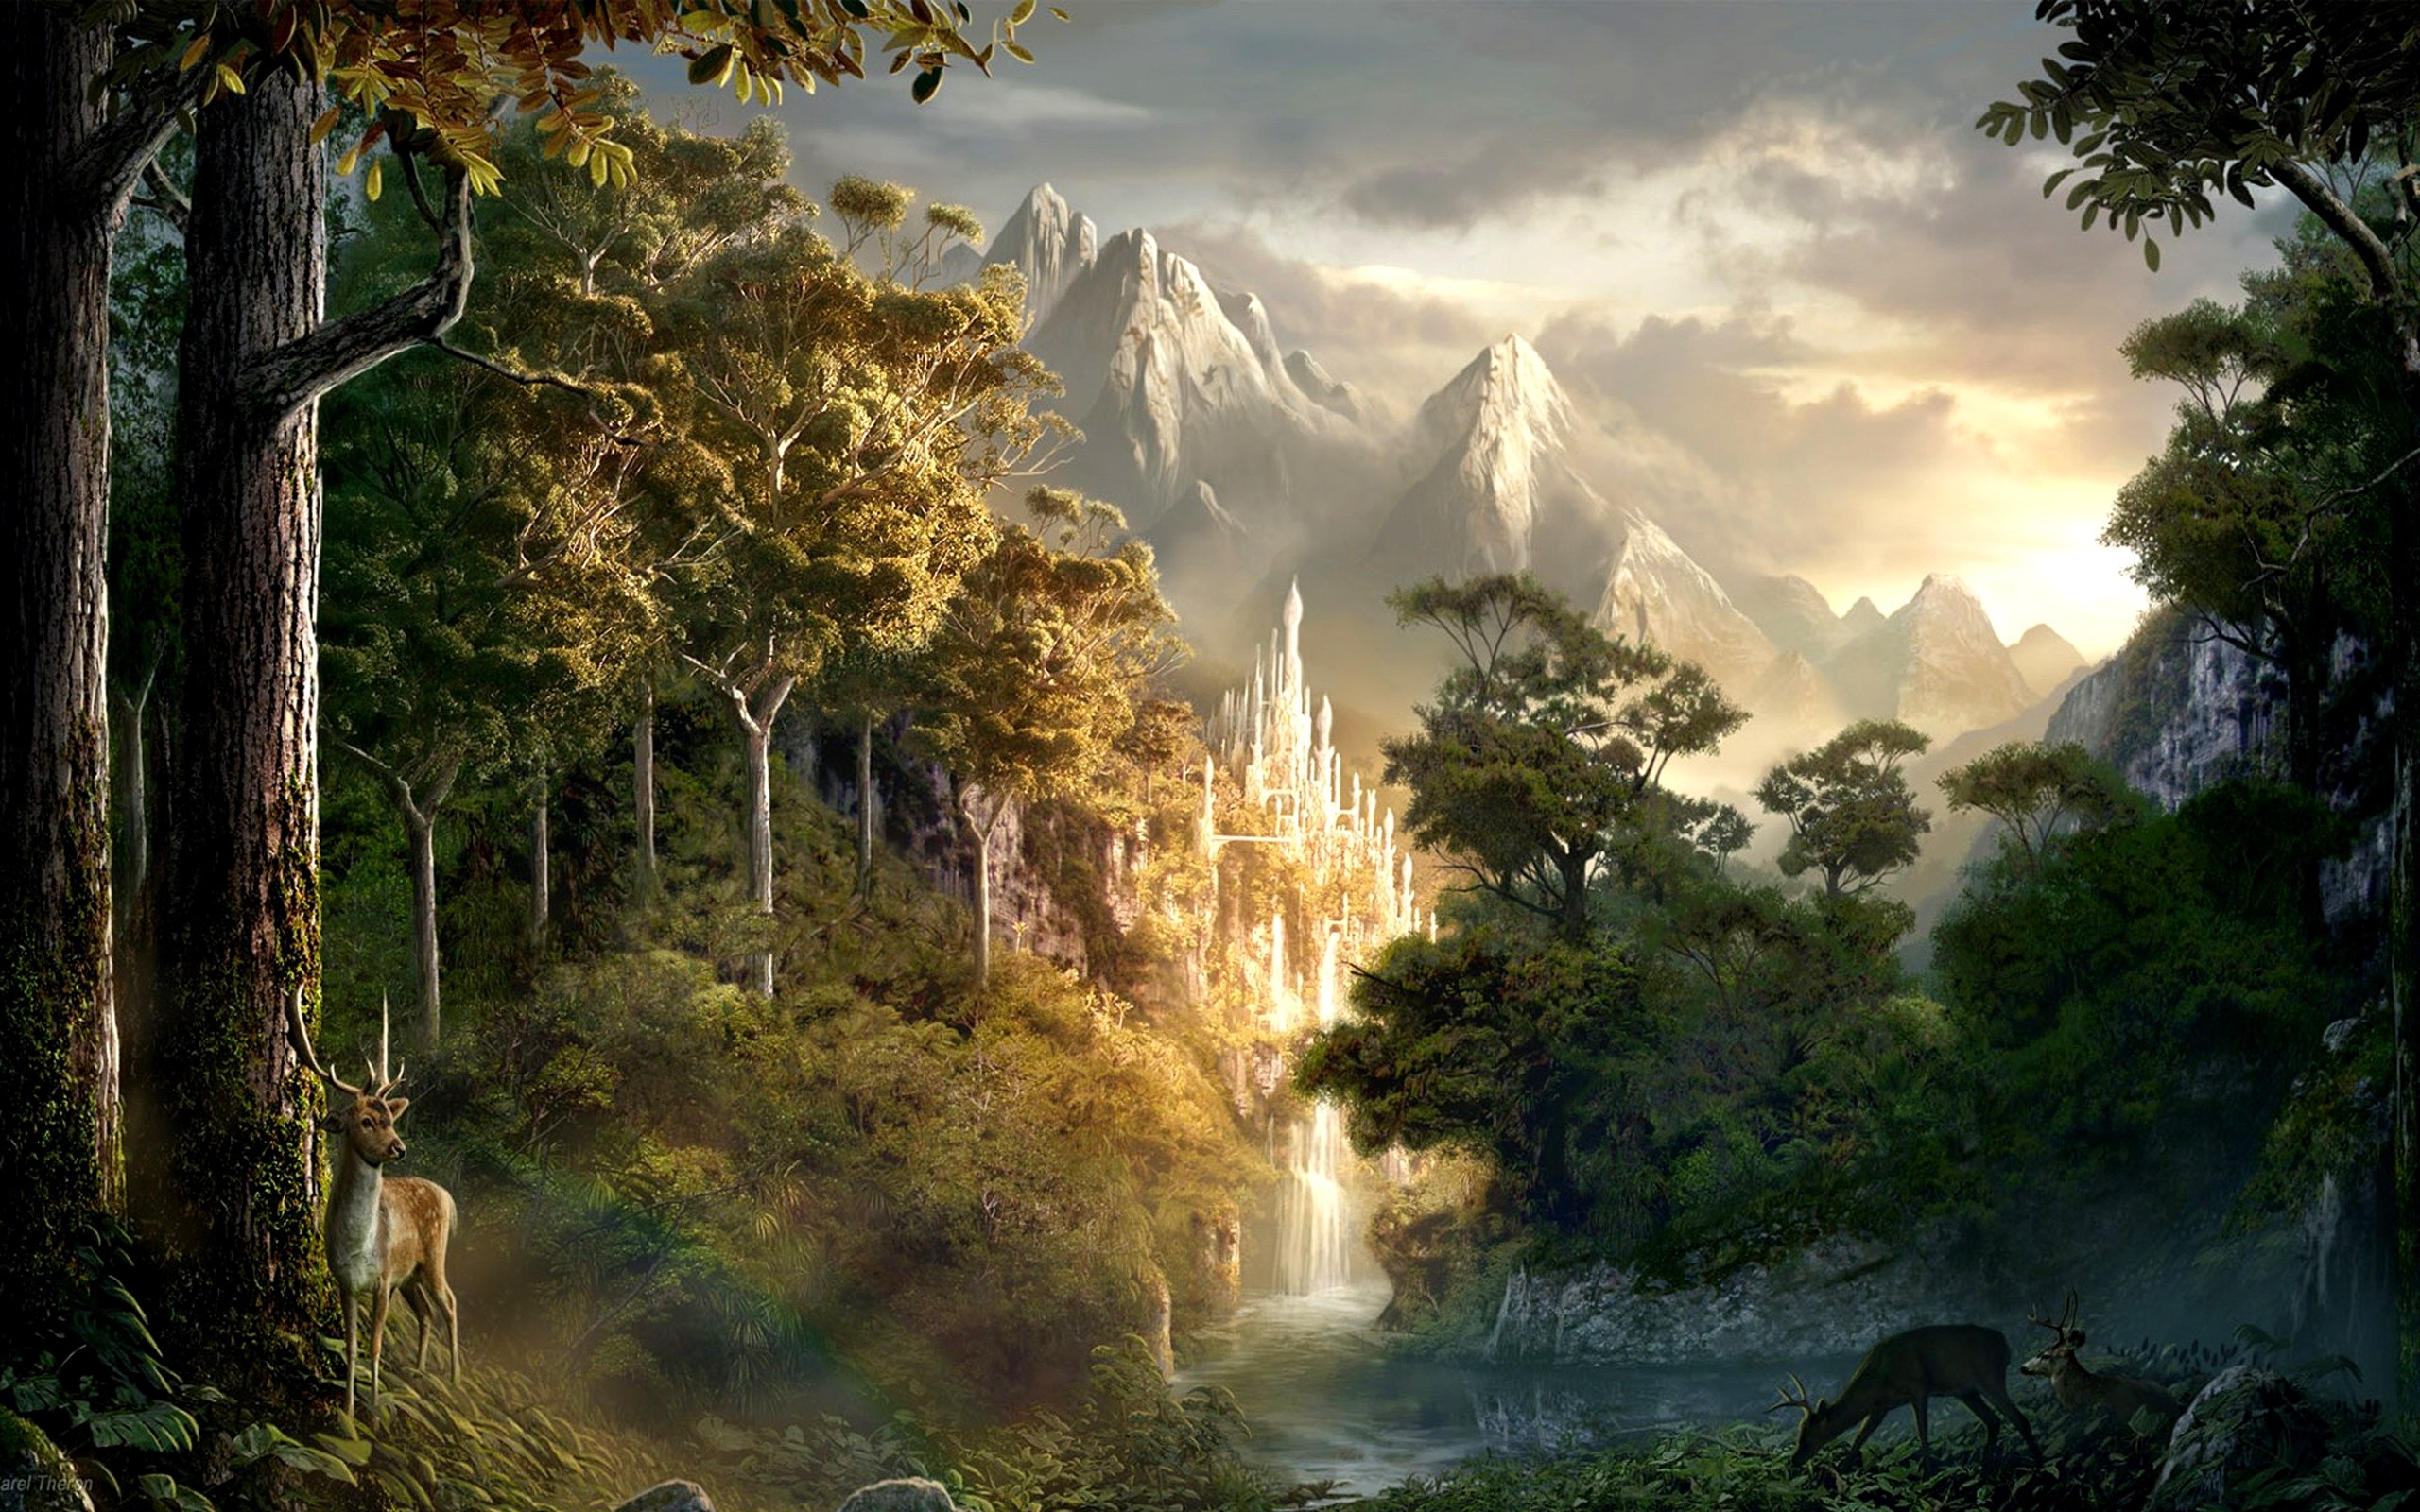 2560x1600 Lord Of The Rings Wallpapers Desktop Background For Desktop Wallpaper 2560  x 1600 px 1.2 MB